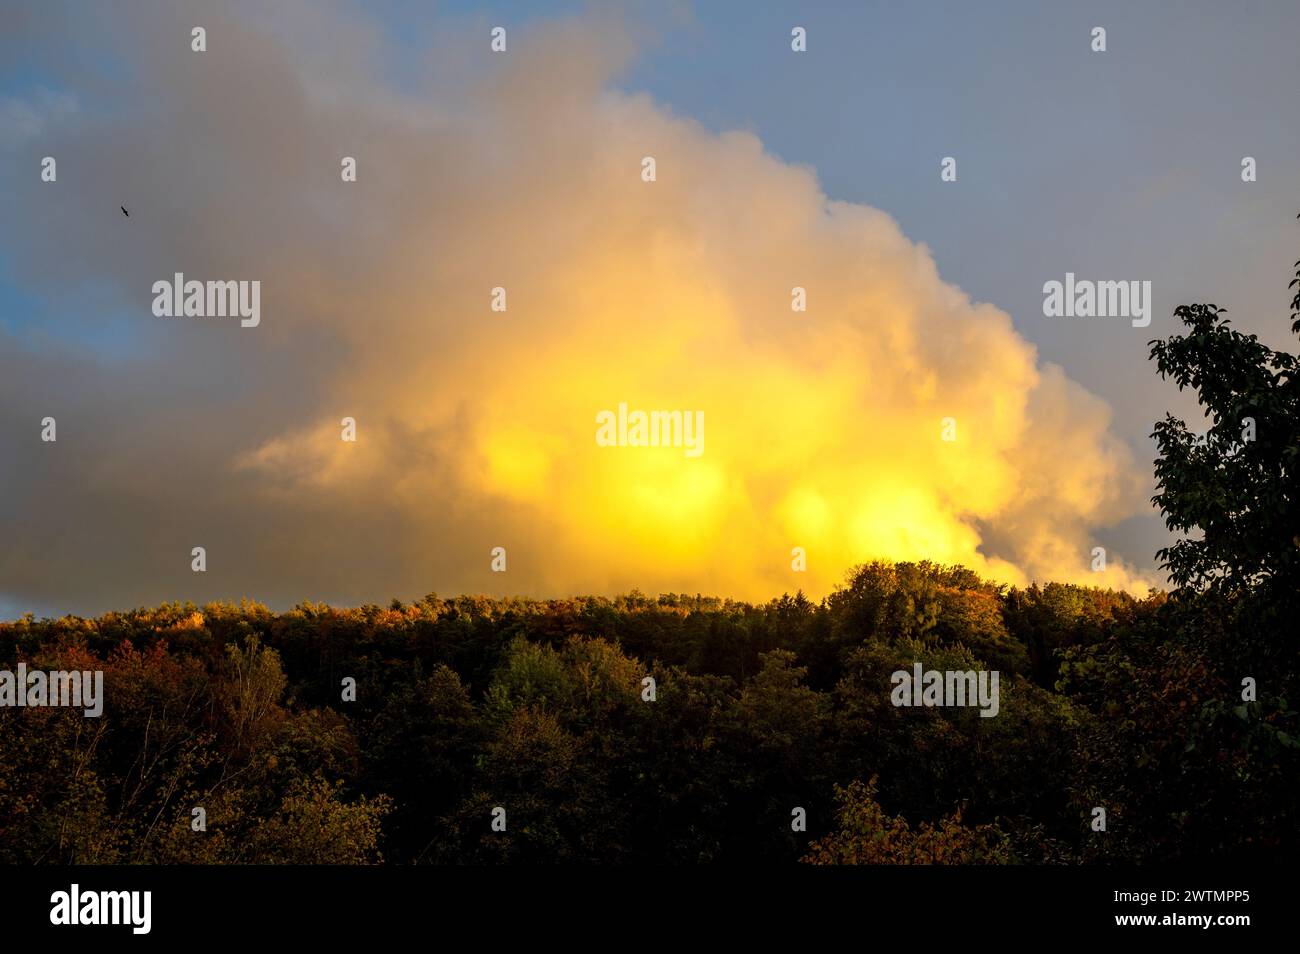 Big yellow cloud in the sky in the evening sun over a green forest Stock Photo